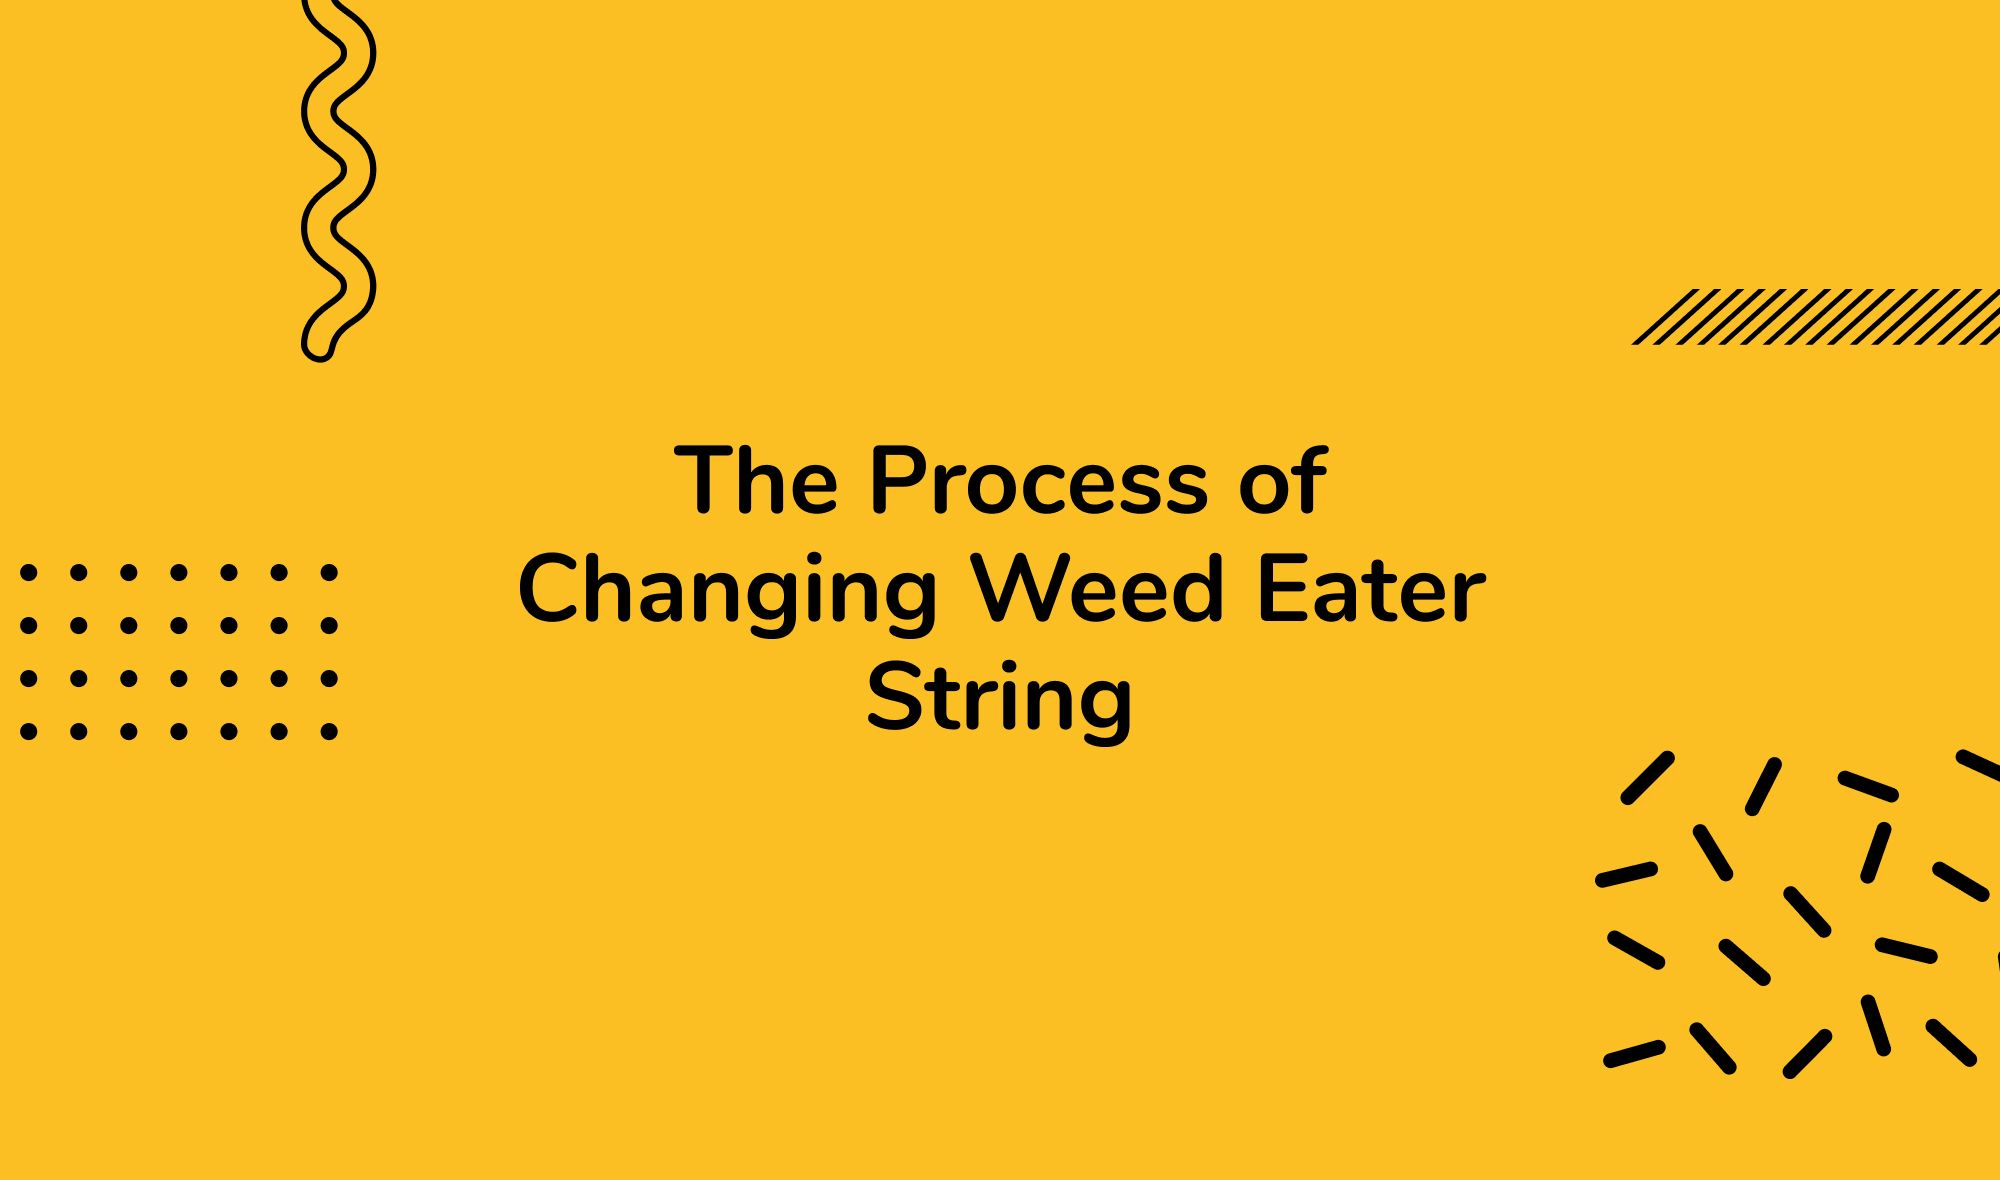 The Process of Changing Weed Eater String